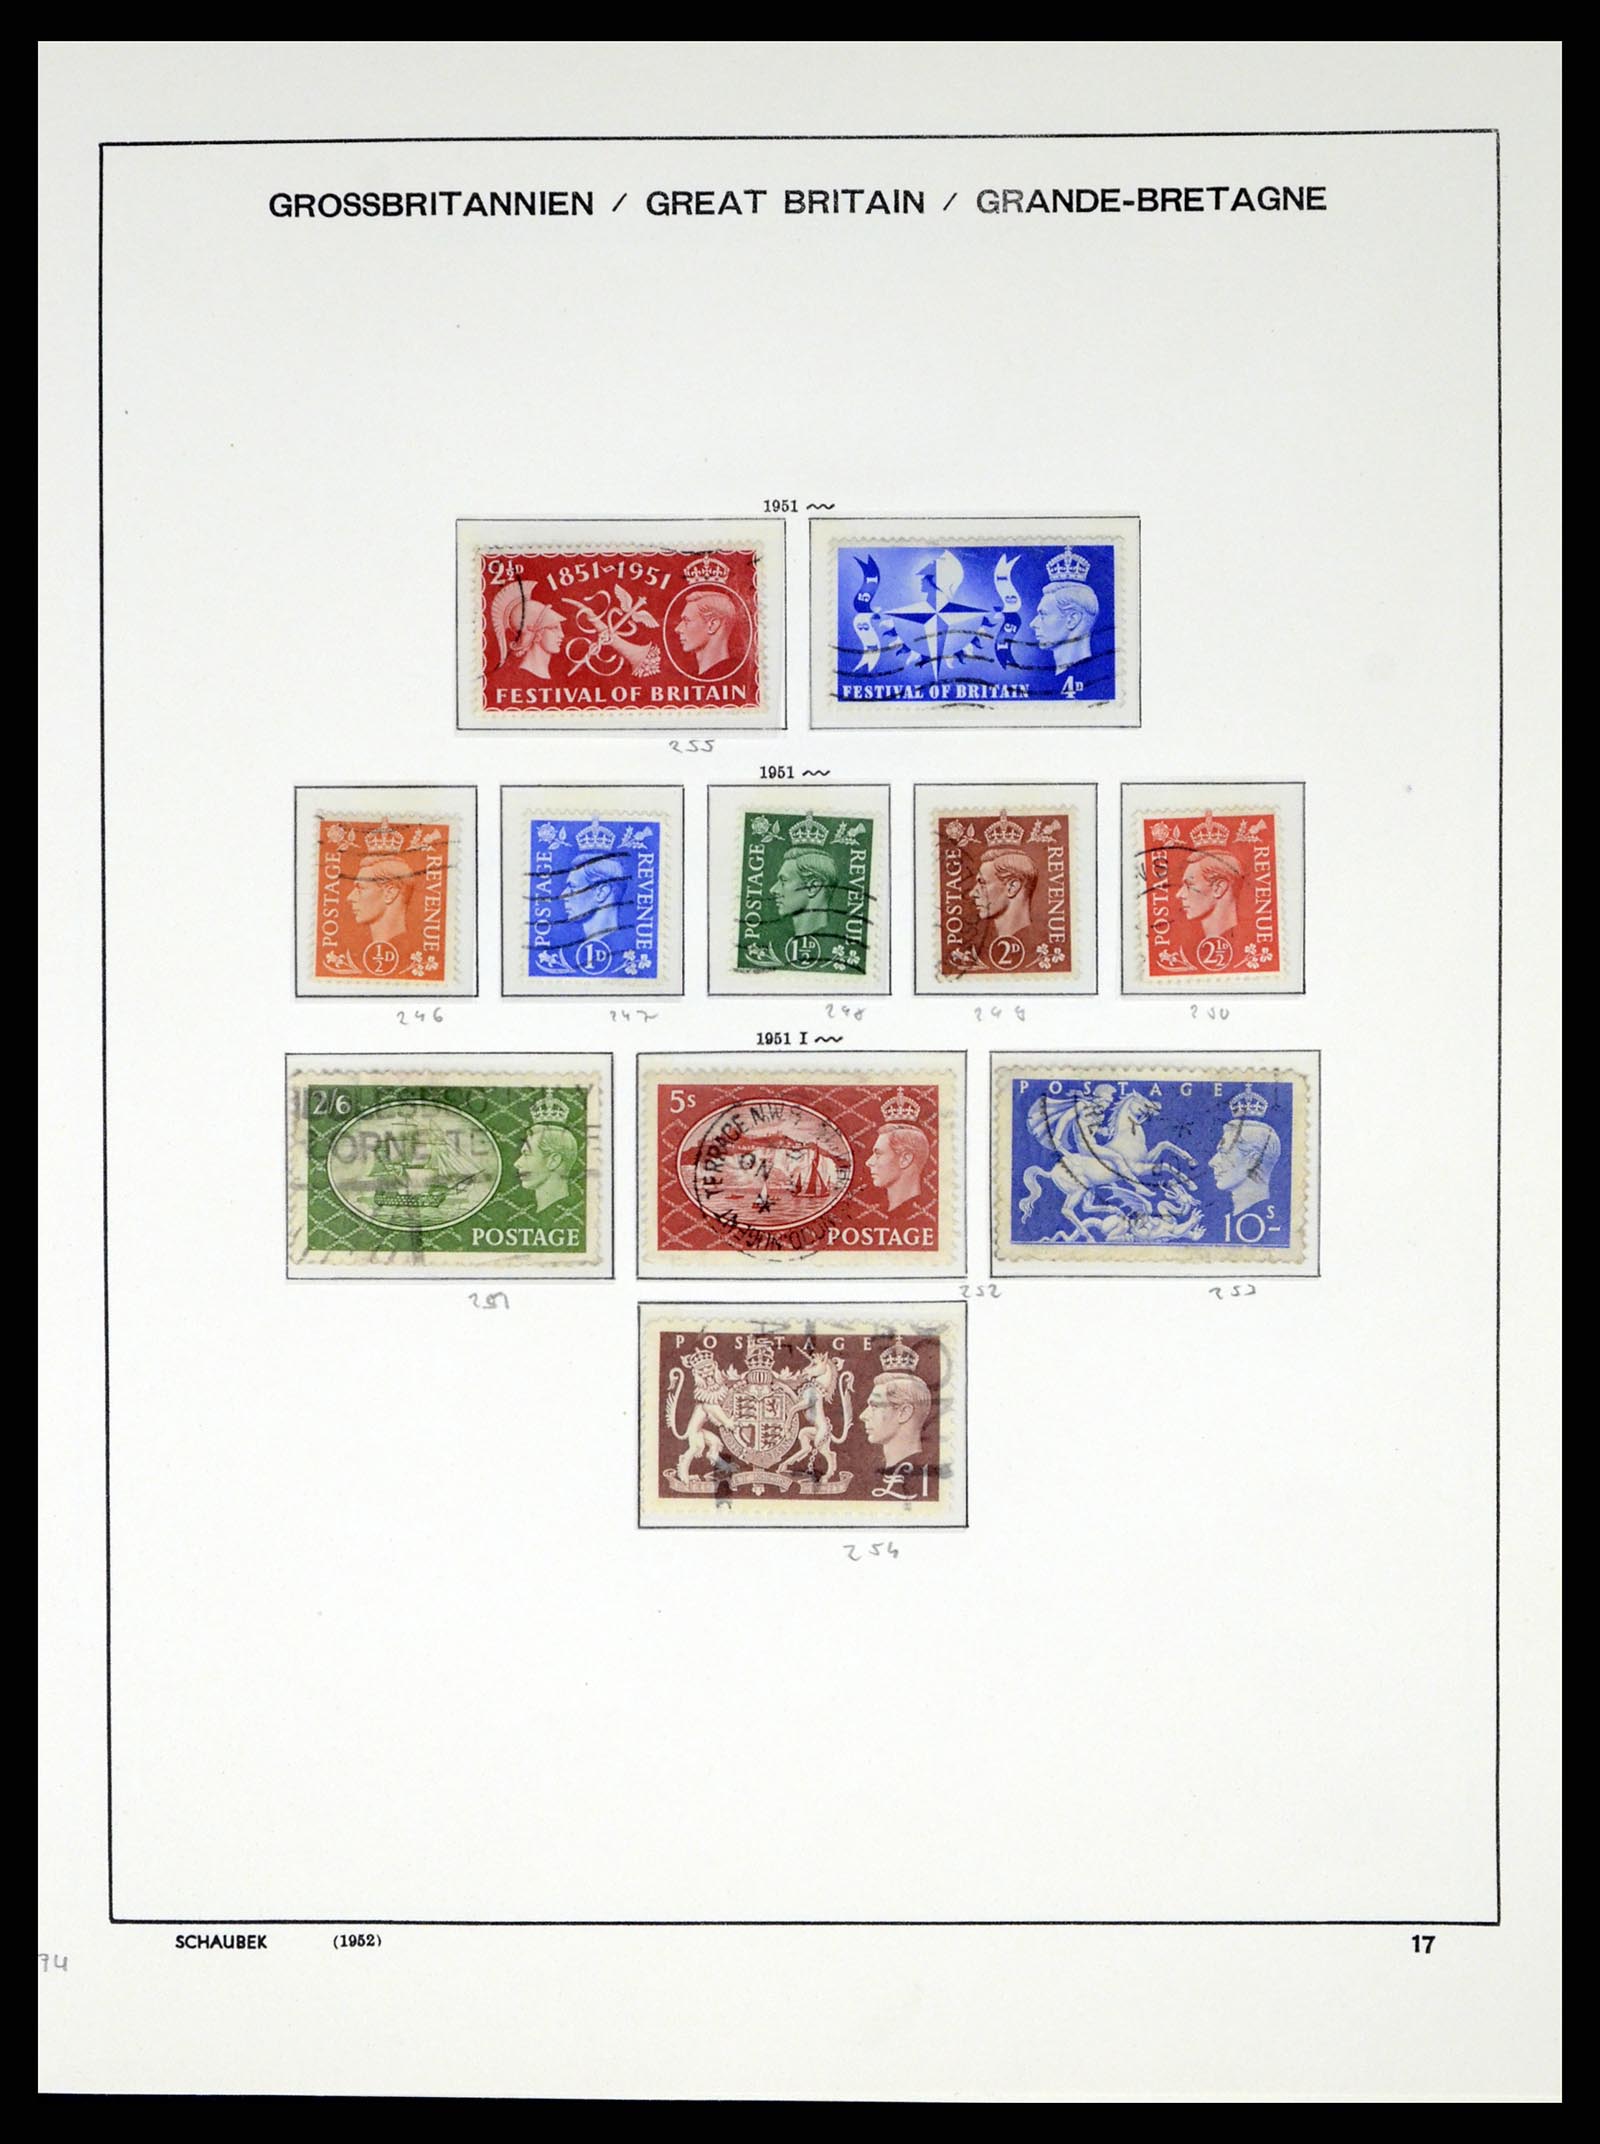 37310 020 - Stamp collection 37310 Great Britain 1840-1988.